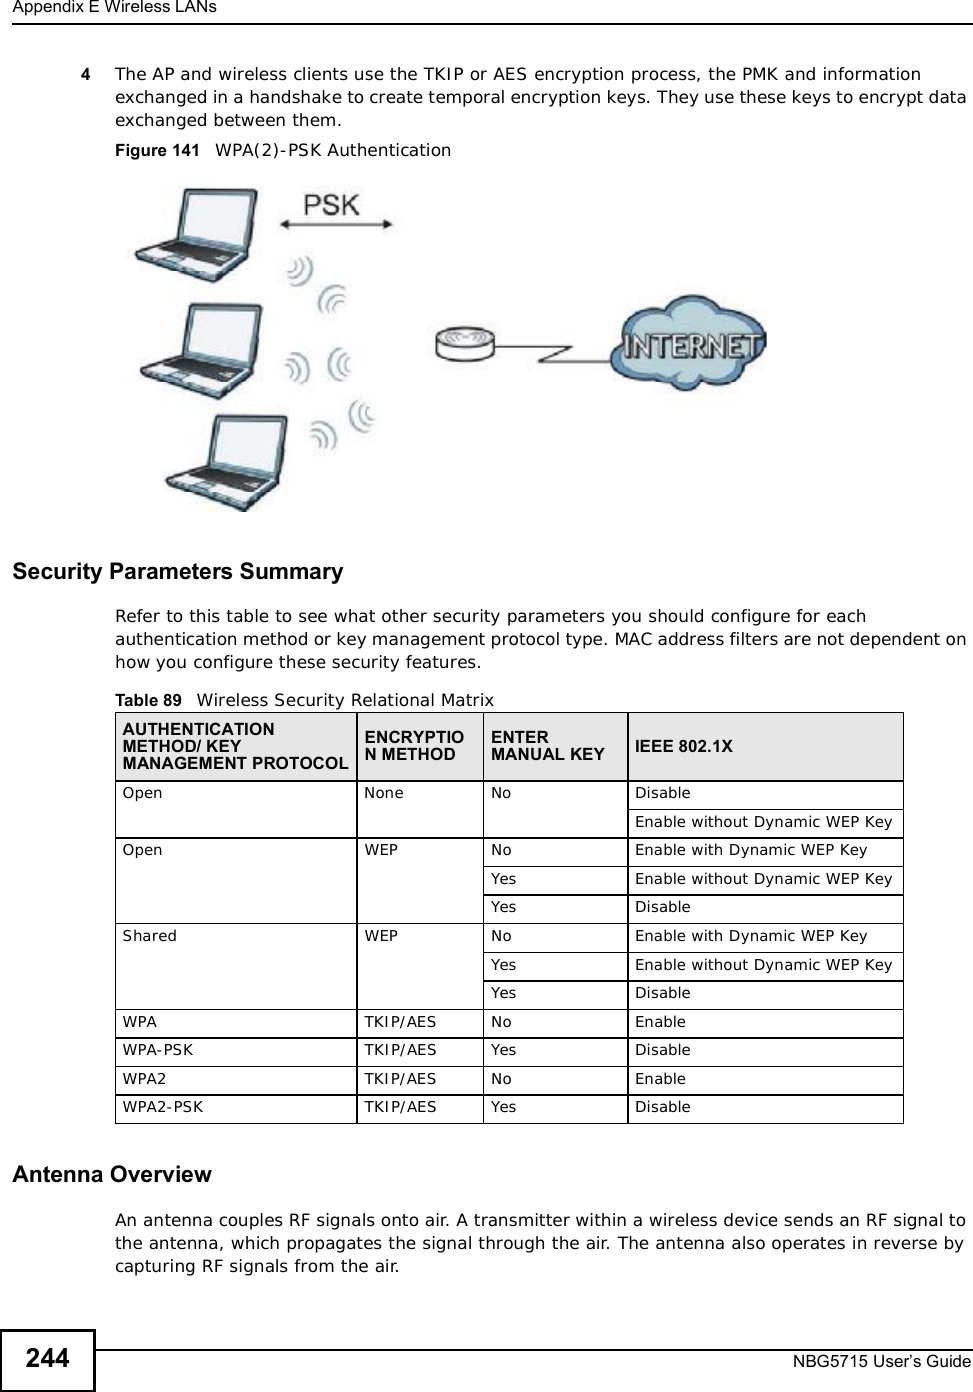 Appendix EWireless LANsNBG5715 User’s Guide2444The AP and wireless clients use the TKIP or AES encryption process, the PMK and information exchanged in a handshake to create temporal encryption keys. They use these keys to encrypt data exchanged between them.Figure 141   WPA(2)-PSK AuthenticationSecurity Parameters SummaryRefer to this table to see what other security parameters you should configure for each authentication method or key management protocol type. MAC address filters are not dependent on how you configure these security features.Antenna OverviewAn antenna couples RF signals onto air. A transmitter within a wireless device sends an RF signal to the antenna, which propagates the signal through the air. The antenna also operates in reverse by capturing RF signals from the air. Table 89   Wireless Security Relational MatrixAUTHENTICATION METHOD/ KEY MANAGEMENT PROTOCOLENCRYPTION METHODENTERMANUAL KEY IEEE 802.1XOpenNoneNoDisableEnable without Dynamic WEP KeyOpen WEP No           Enable with Dynamic WEP KeyYes Enable without Dynamic WEP KeyYes DisableShared WEP  No           Enable with Dynamic WEP KeyYes Enable without Dynamic WEP KeyYes DisableWPA  TKIP/AES No EnableWPA-PSK  TKIP/AES Yes DisableWPA2 TKIP/AES No EnableWPA2-PSK  TKIP/AES Yes Disable